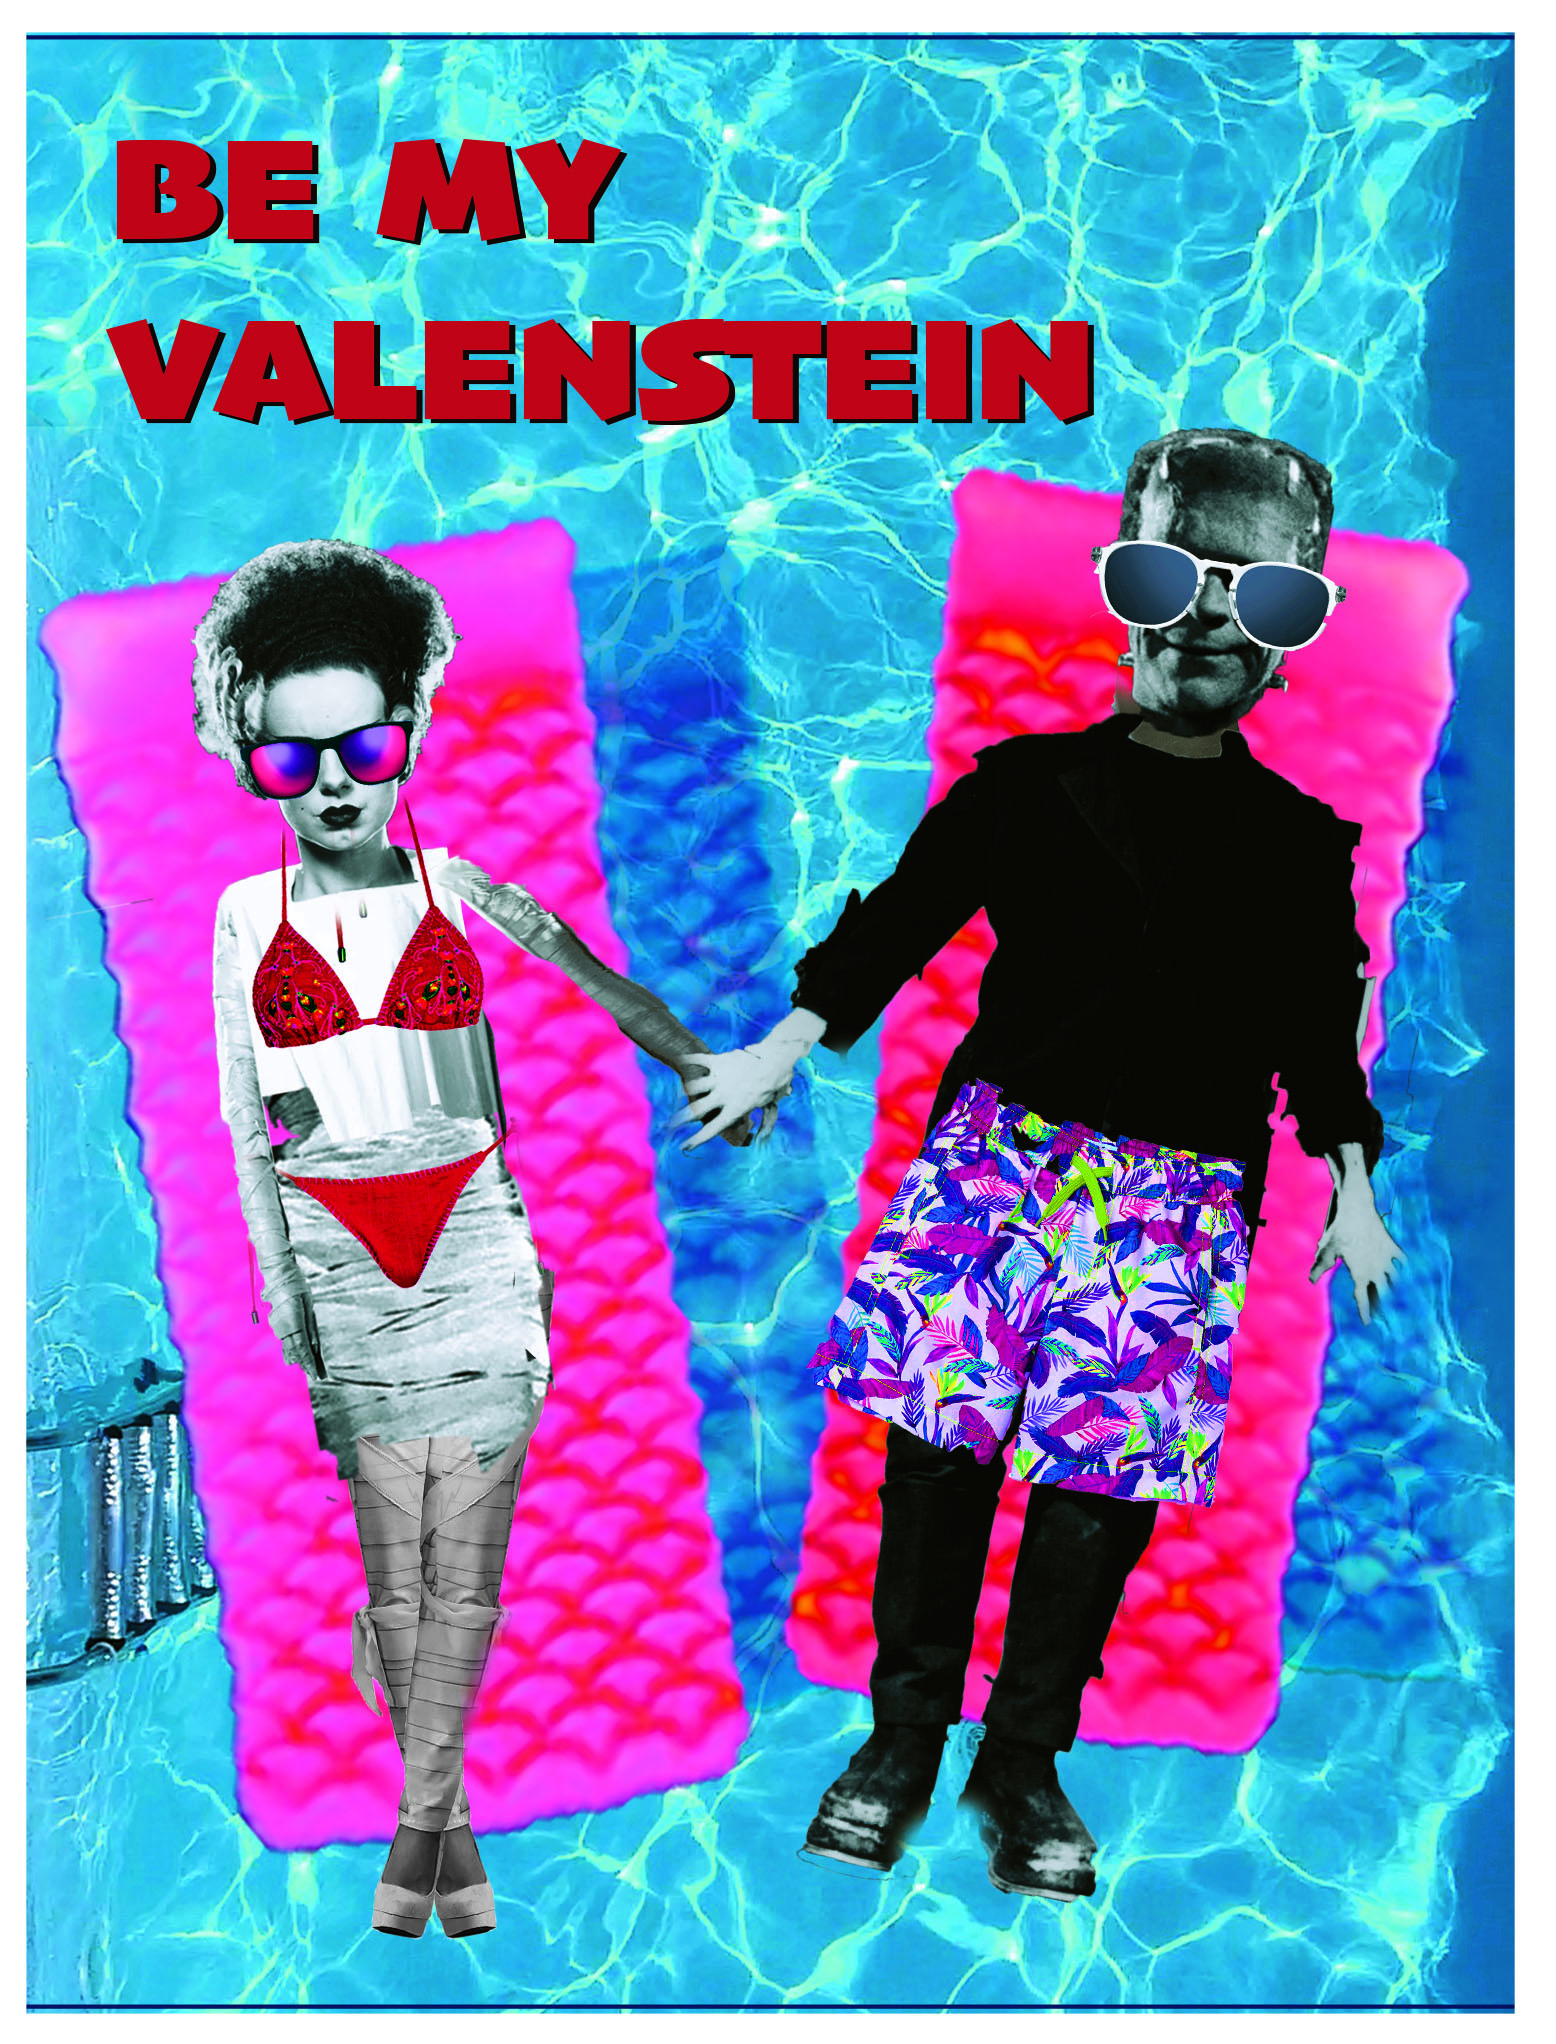 A greeting card of Frankenstein and the Bride of Frankenstein on pool rafts.